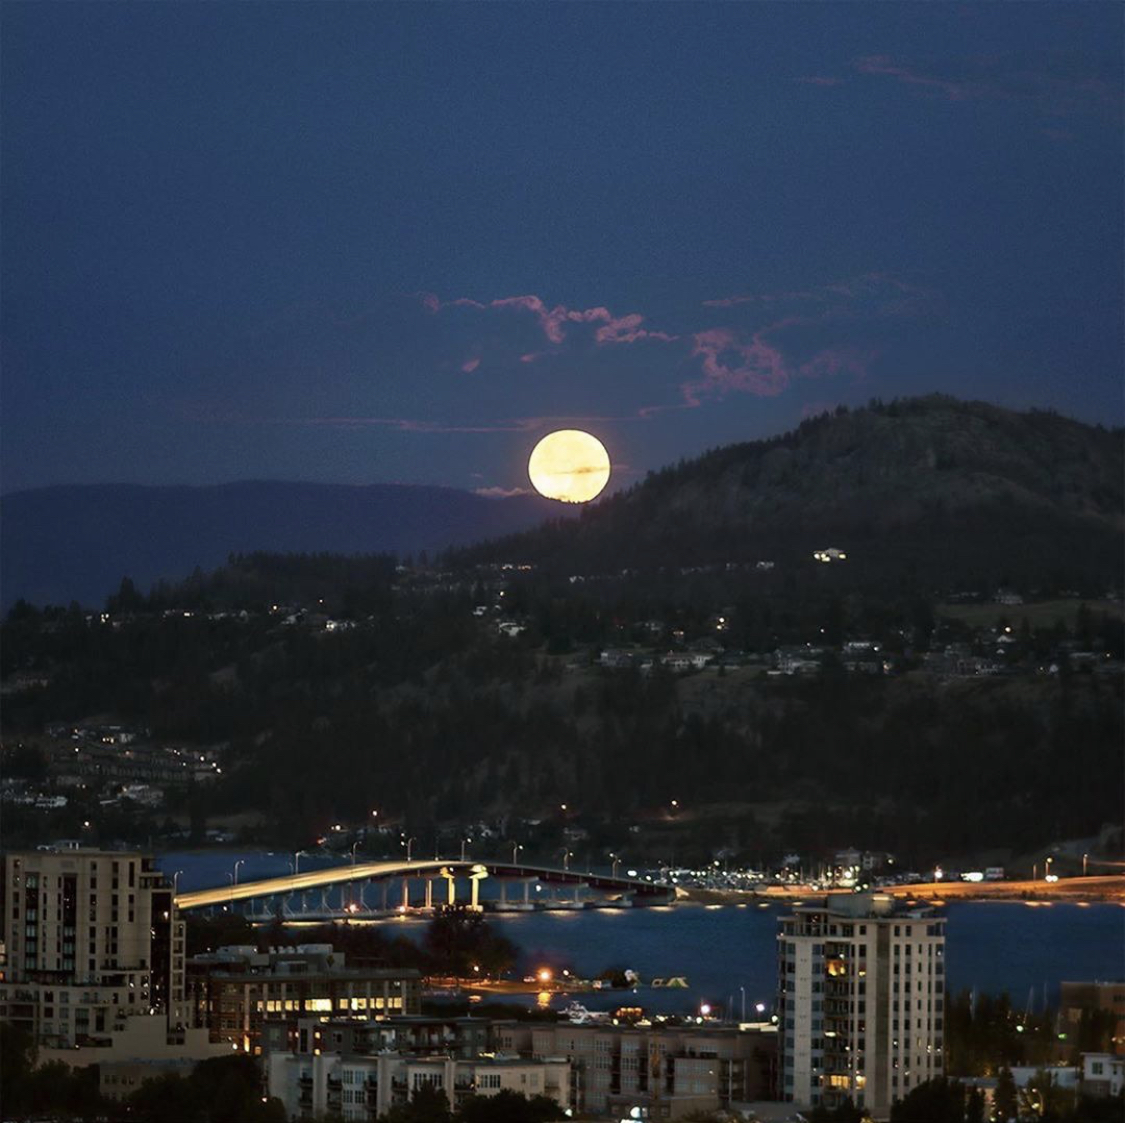 The beautiful moon over Kelowna shared by @KelownaNow and taken by @okv_pix on Instagram - just stunning! #OKWineFests